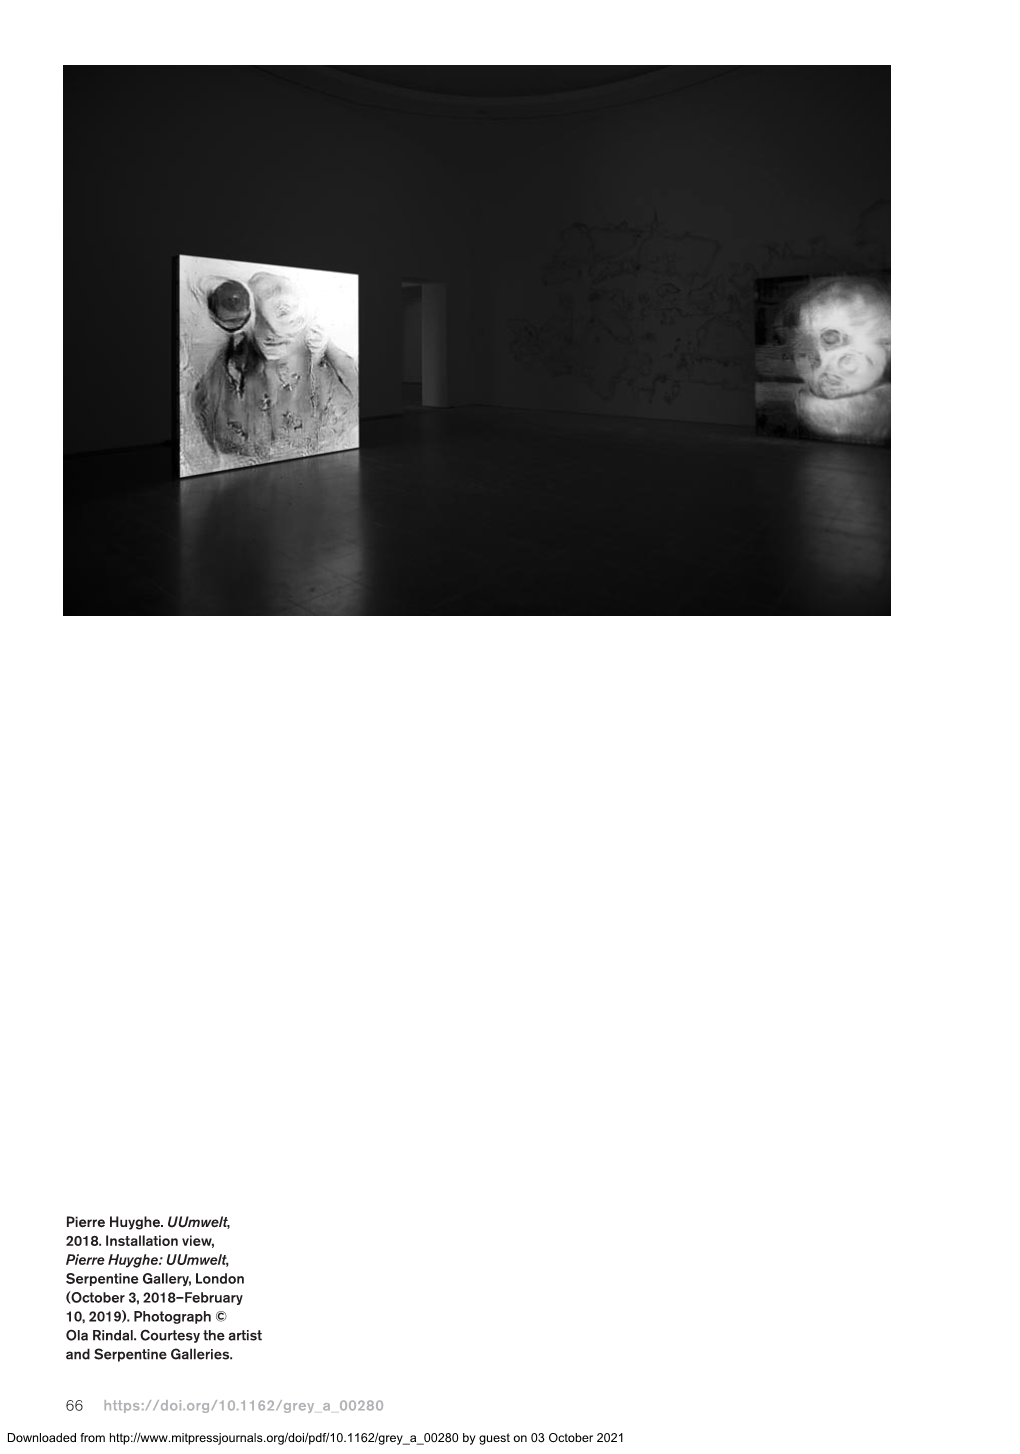 Pdf/10.1162/Grey a 00280 by Guest on 03 October 2021 on Pierre Huyghe’S Uumweltanschauung: Art, Ecosystems Aesthetics, and General Ecology